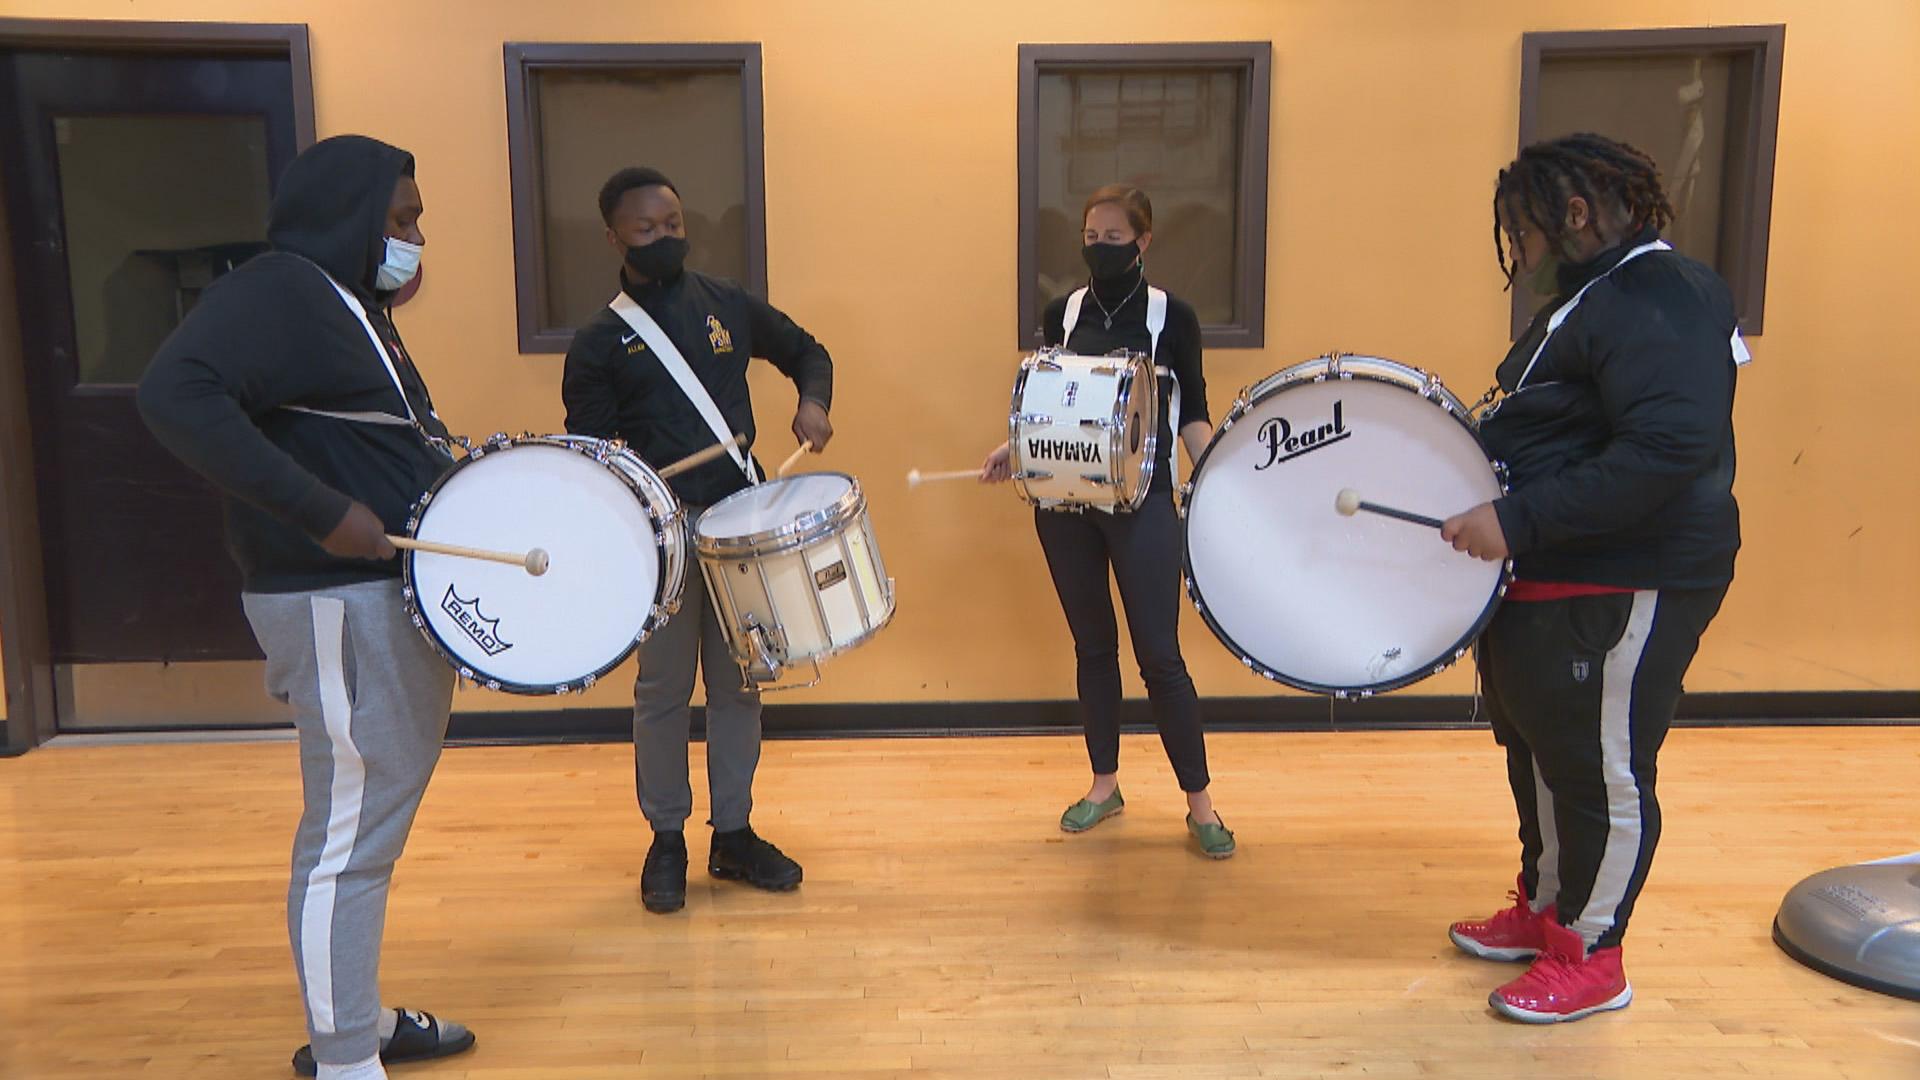 The drum line of BandWith rehearses inside the gymnasium of Marillac St. Vincent Family Services in East Garfield Park on Oct. 15, 2020. Snare drummer Marquis Allen, second to left, is the student instructor of the drum ensemble. (WTTW News)